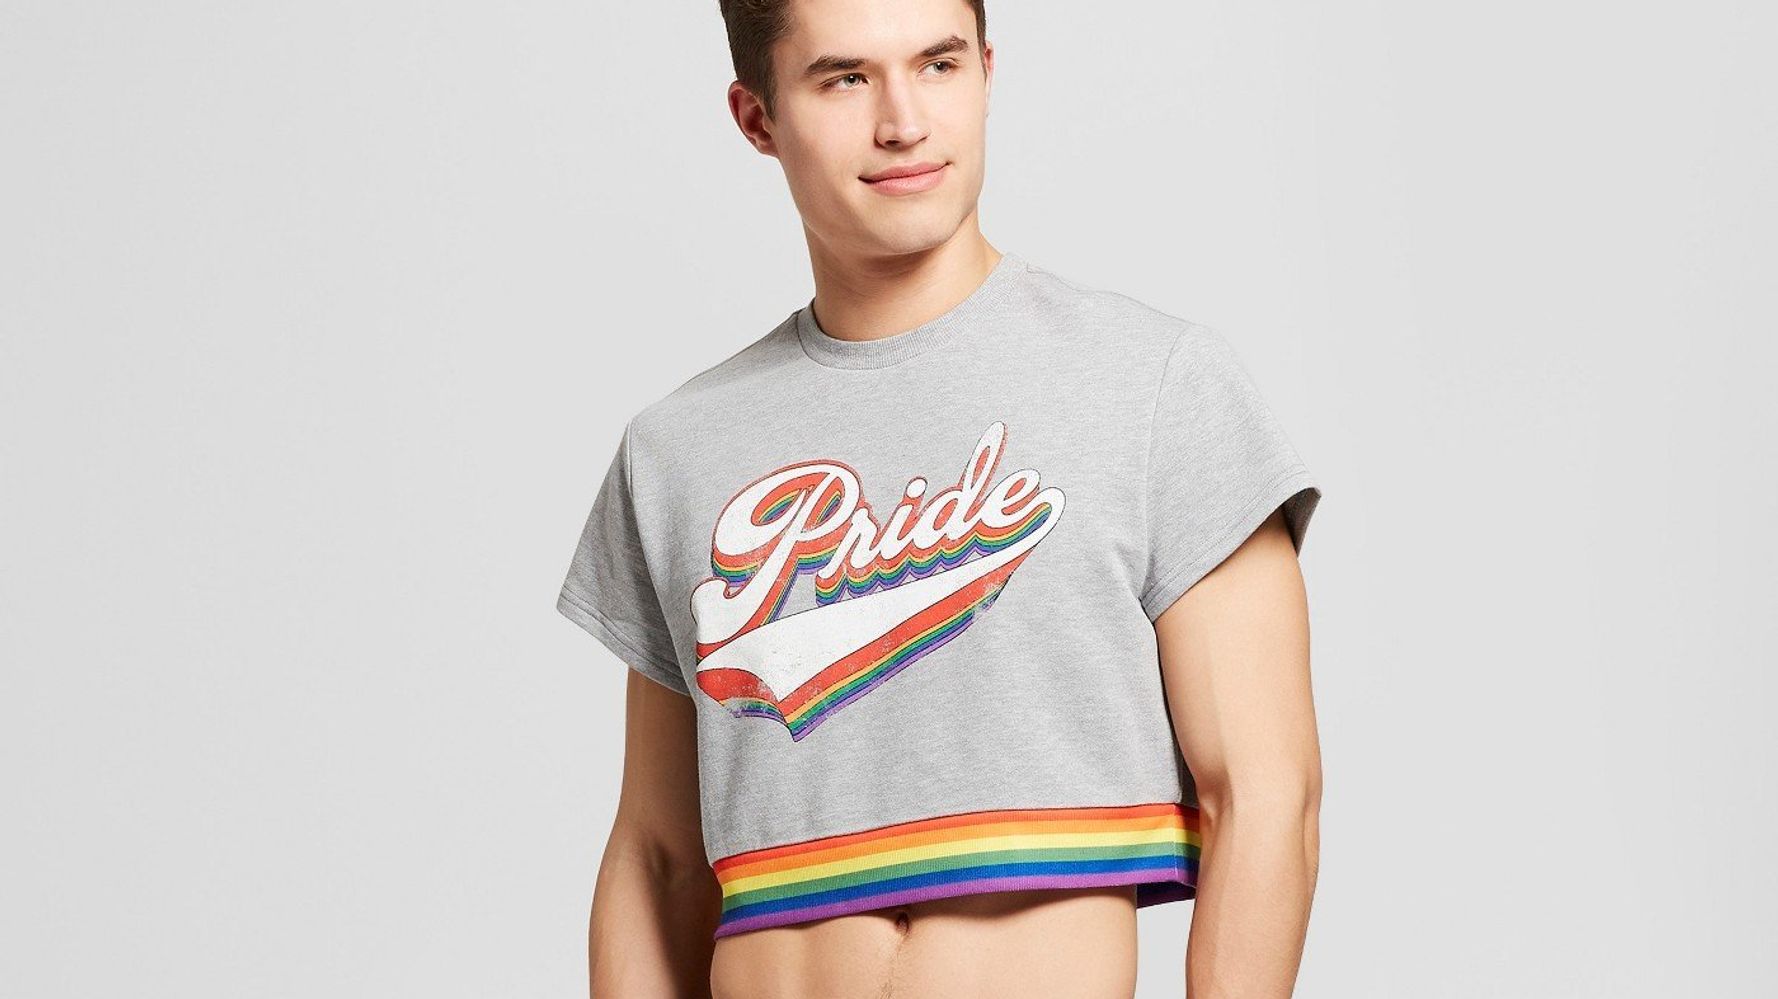 23 Fierce Pride Outfits To Wear This Year | HuffPost UK Queer Voices